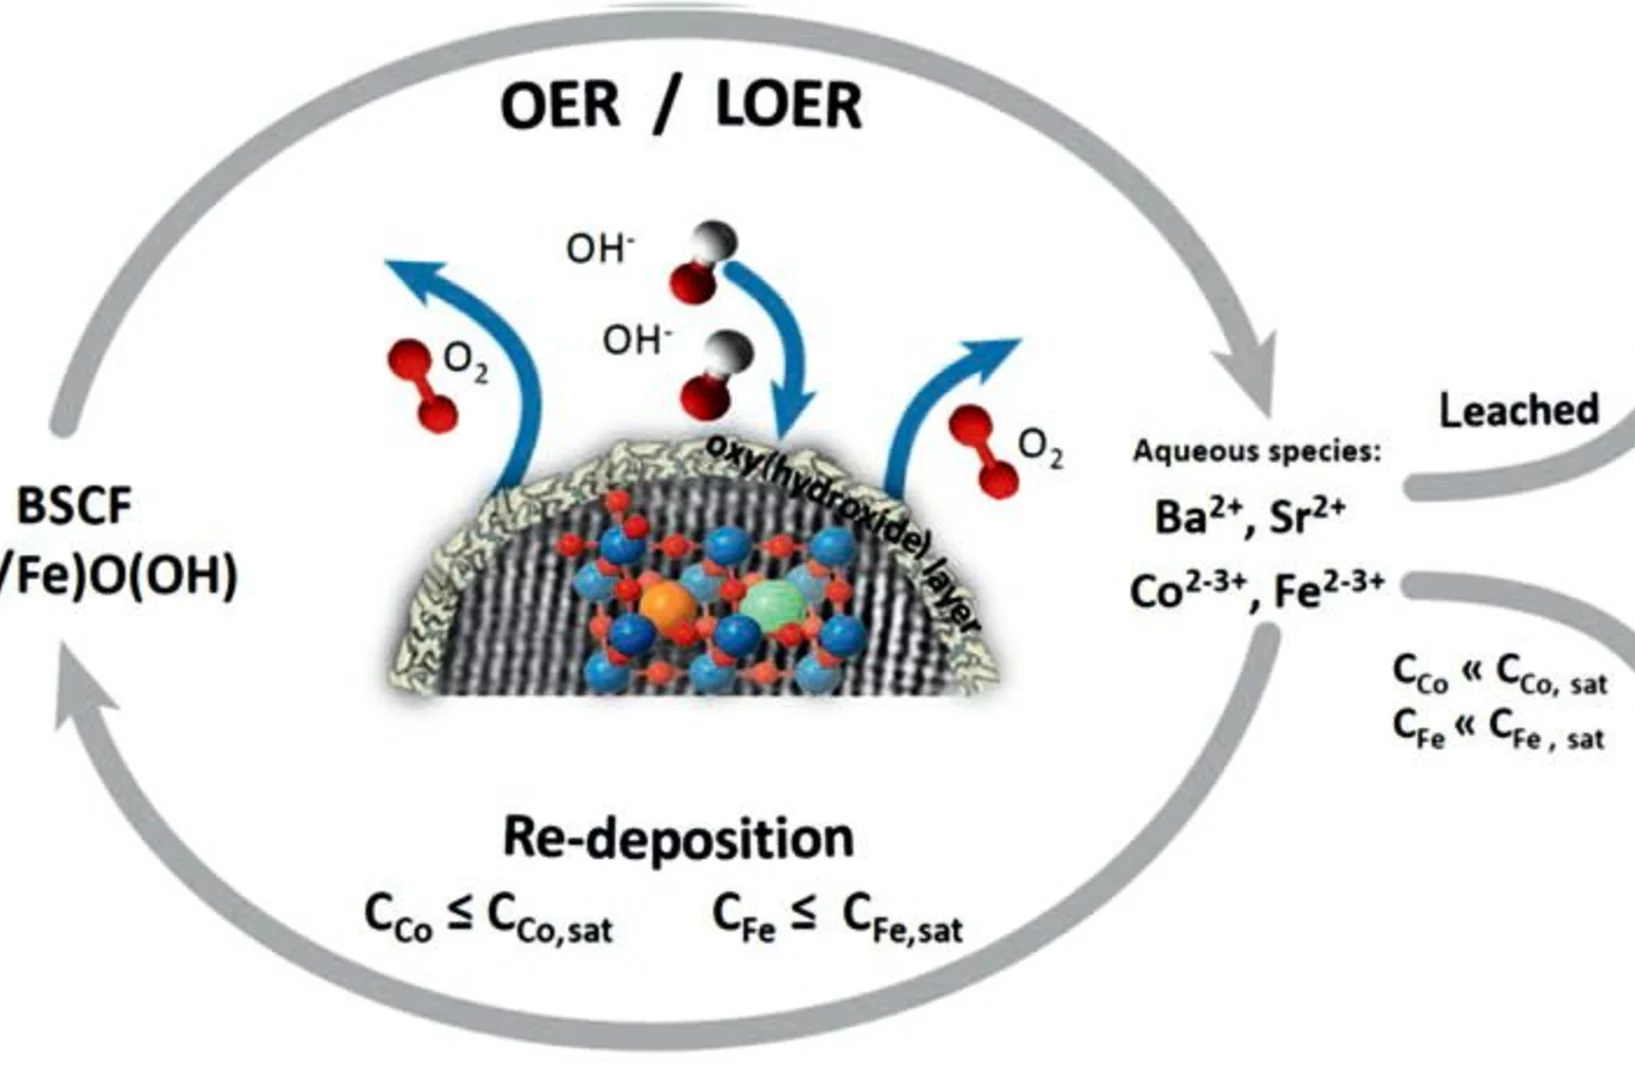 OER/LOER and dissolution/ redeposition mechanism